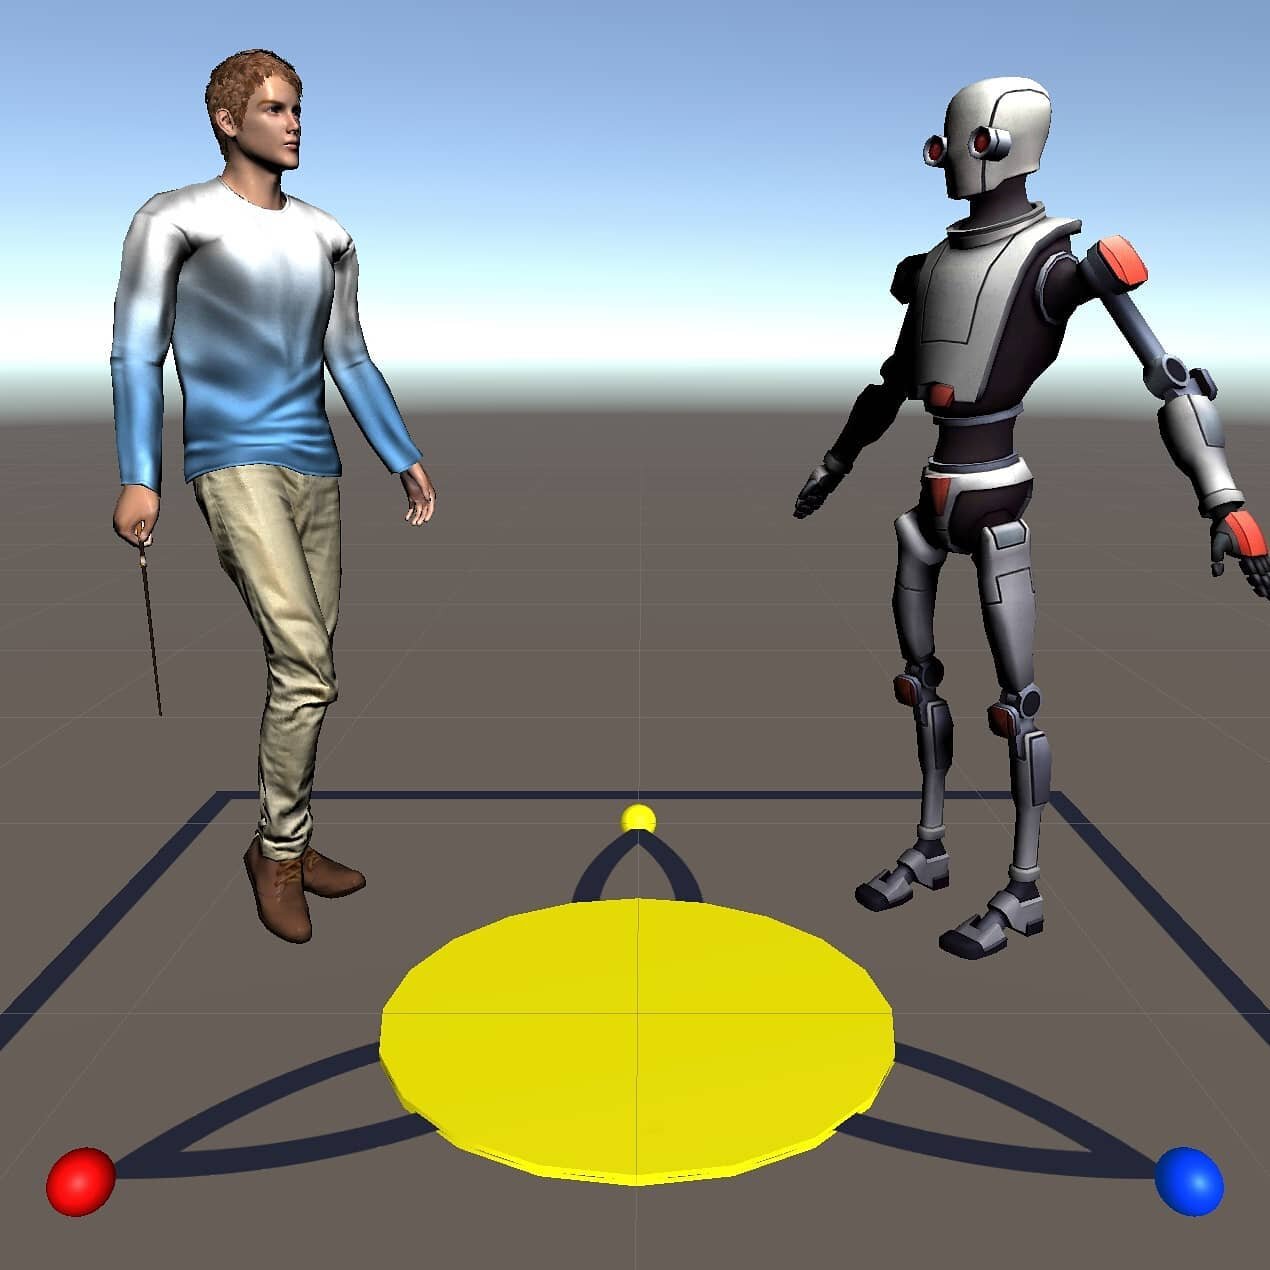 Well, this is what happens when I'm in isolation too long. Suddenly I've build a video game where gay wizards fight evil robots with their husky companion. #Quarintine #instagay #unity3d